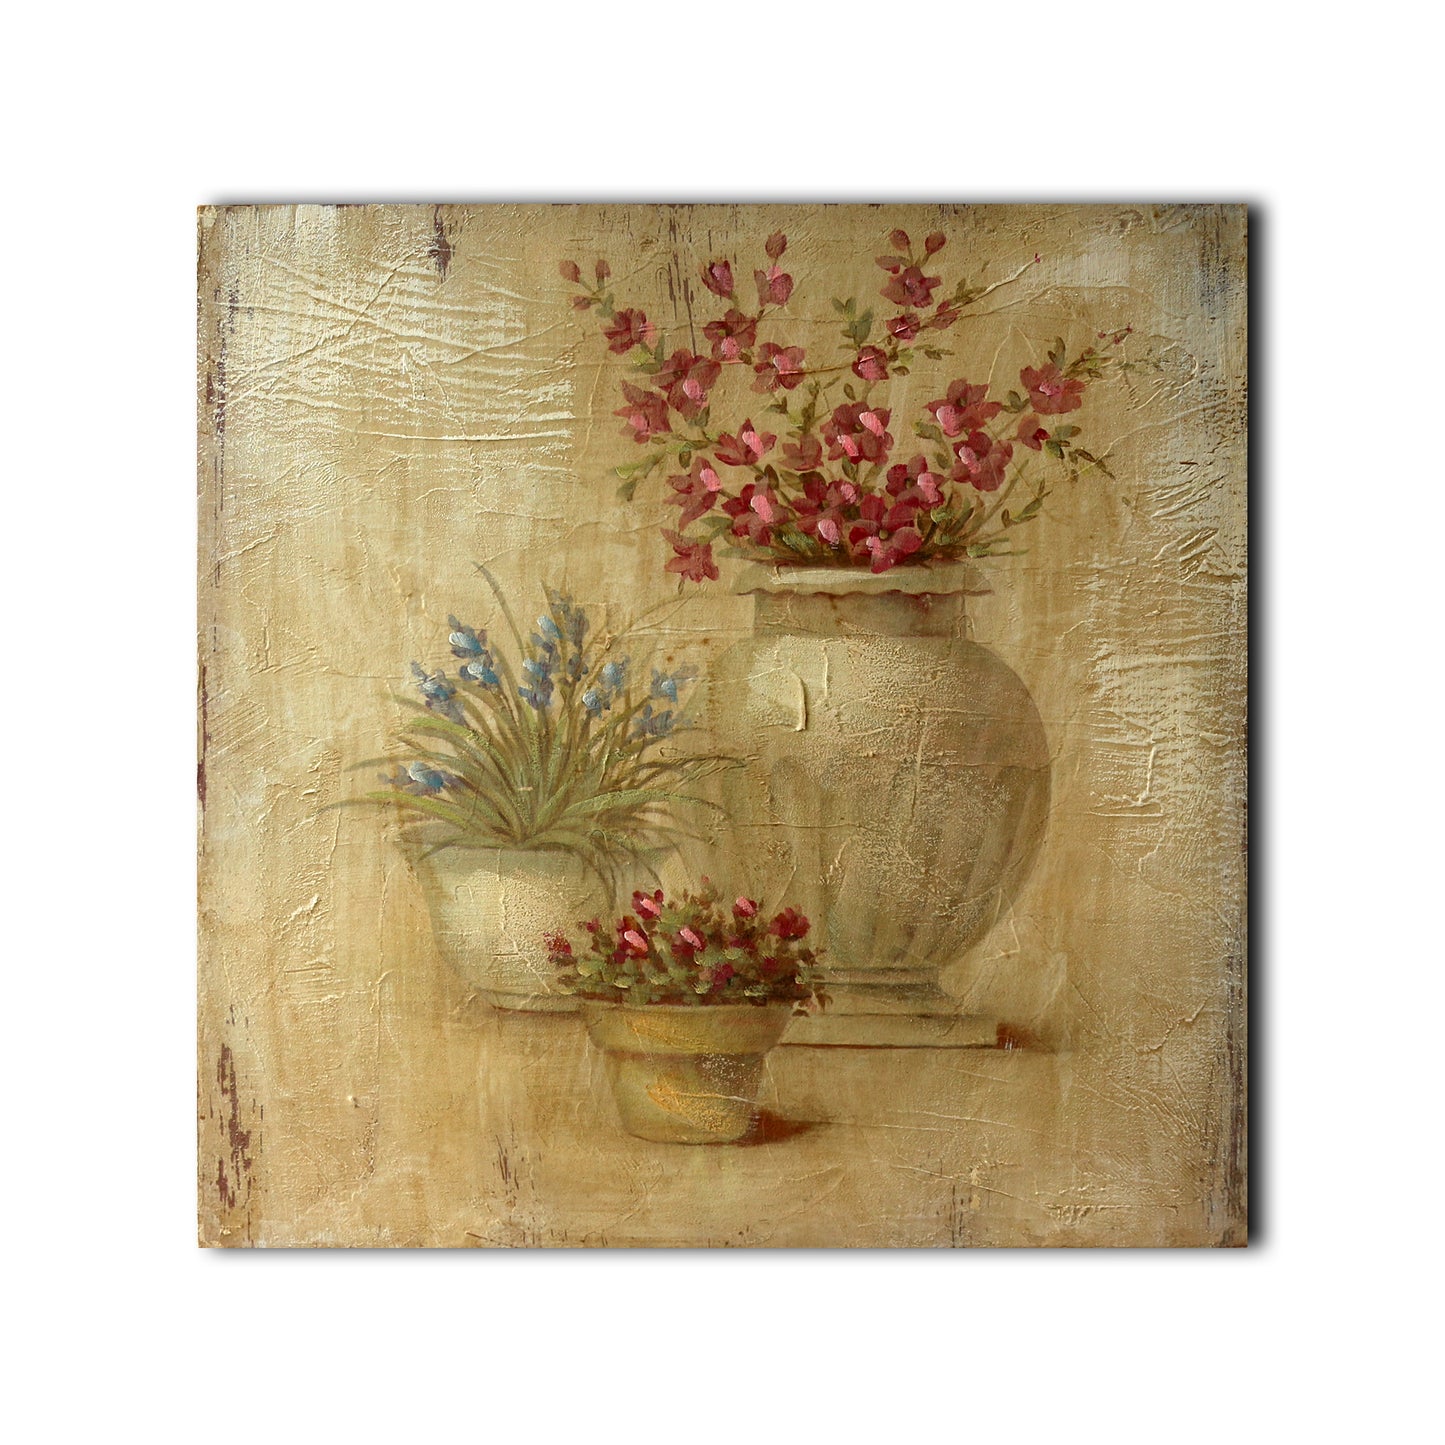 CVHOMEDECO. Rustic Vintage Hand Painted Wooden Frame Wall Hanging 3D Painting Decoration Art, Flower in Planter Design, 15 x 15 Inch